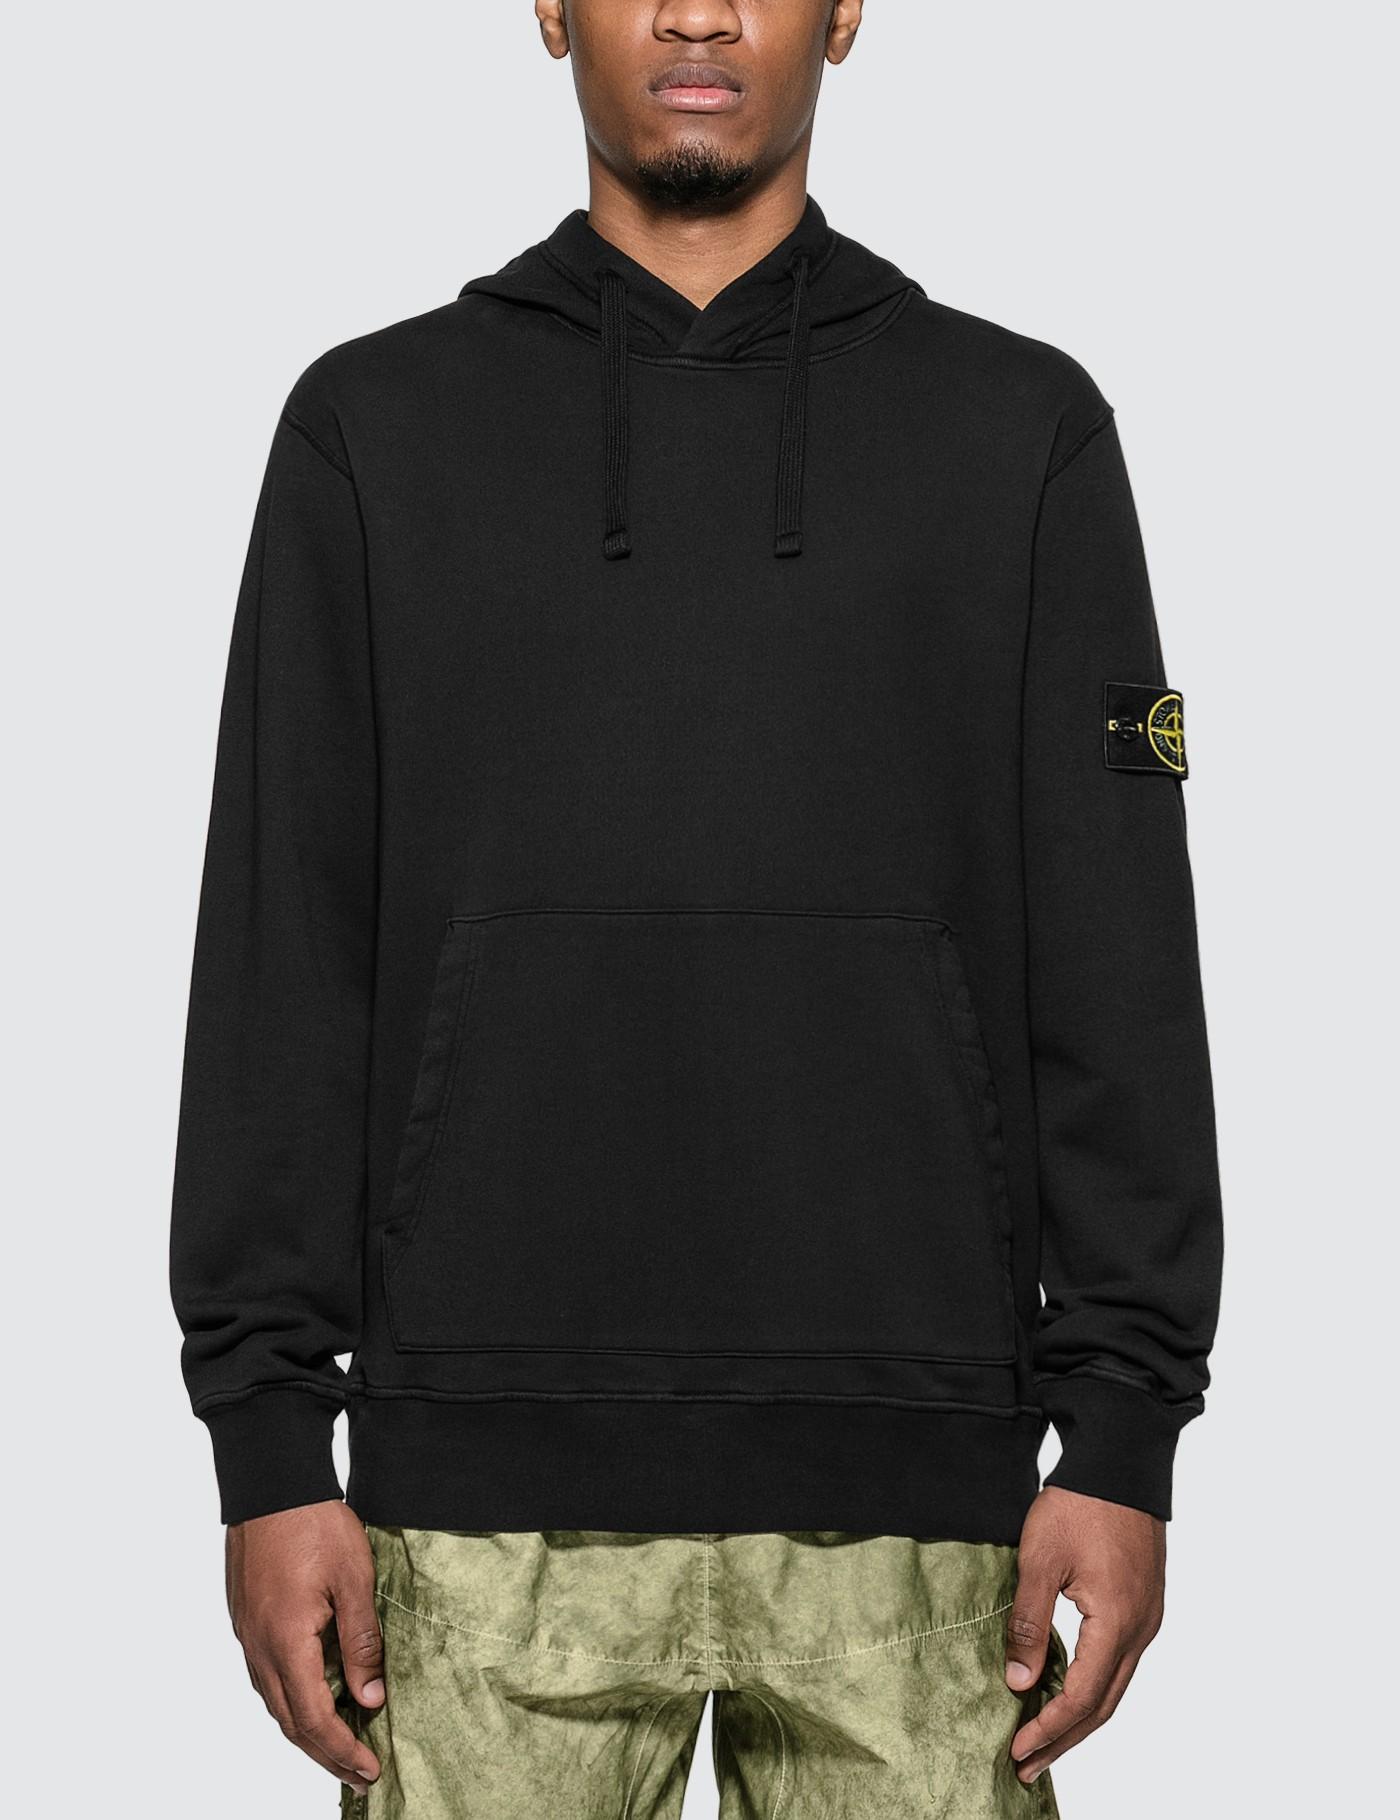 Stone Island Classic Compass Logo Hoodie in Black for Men - Lyst